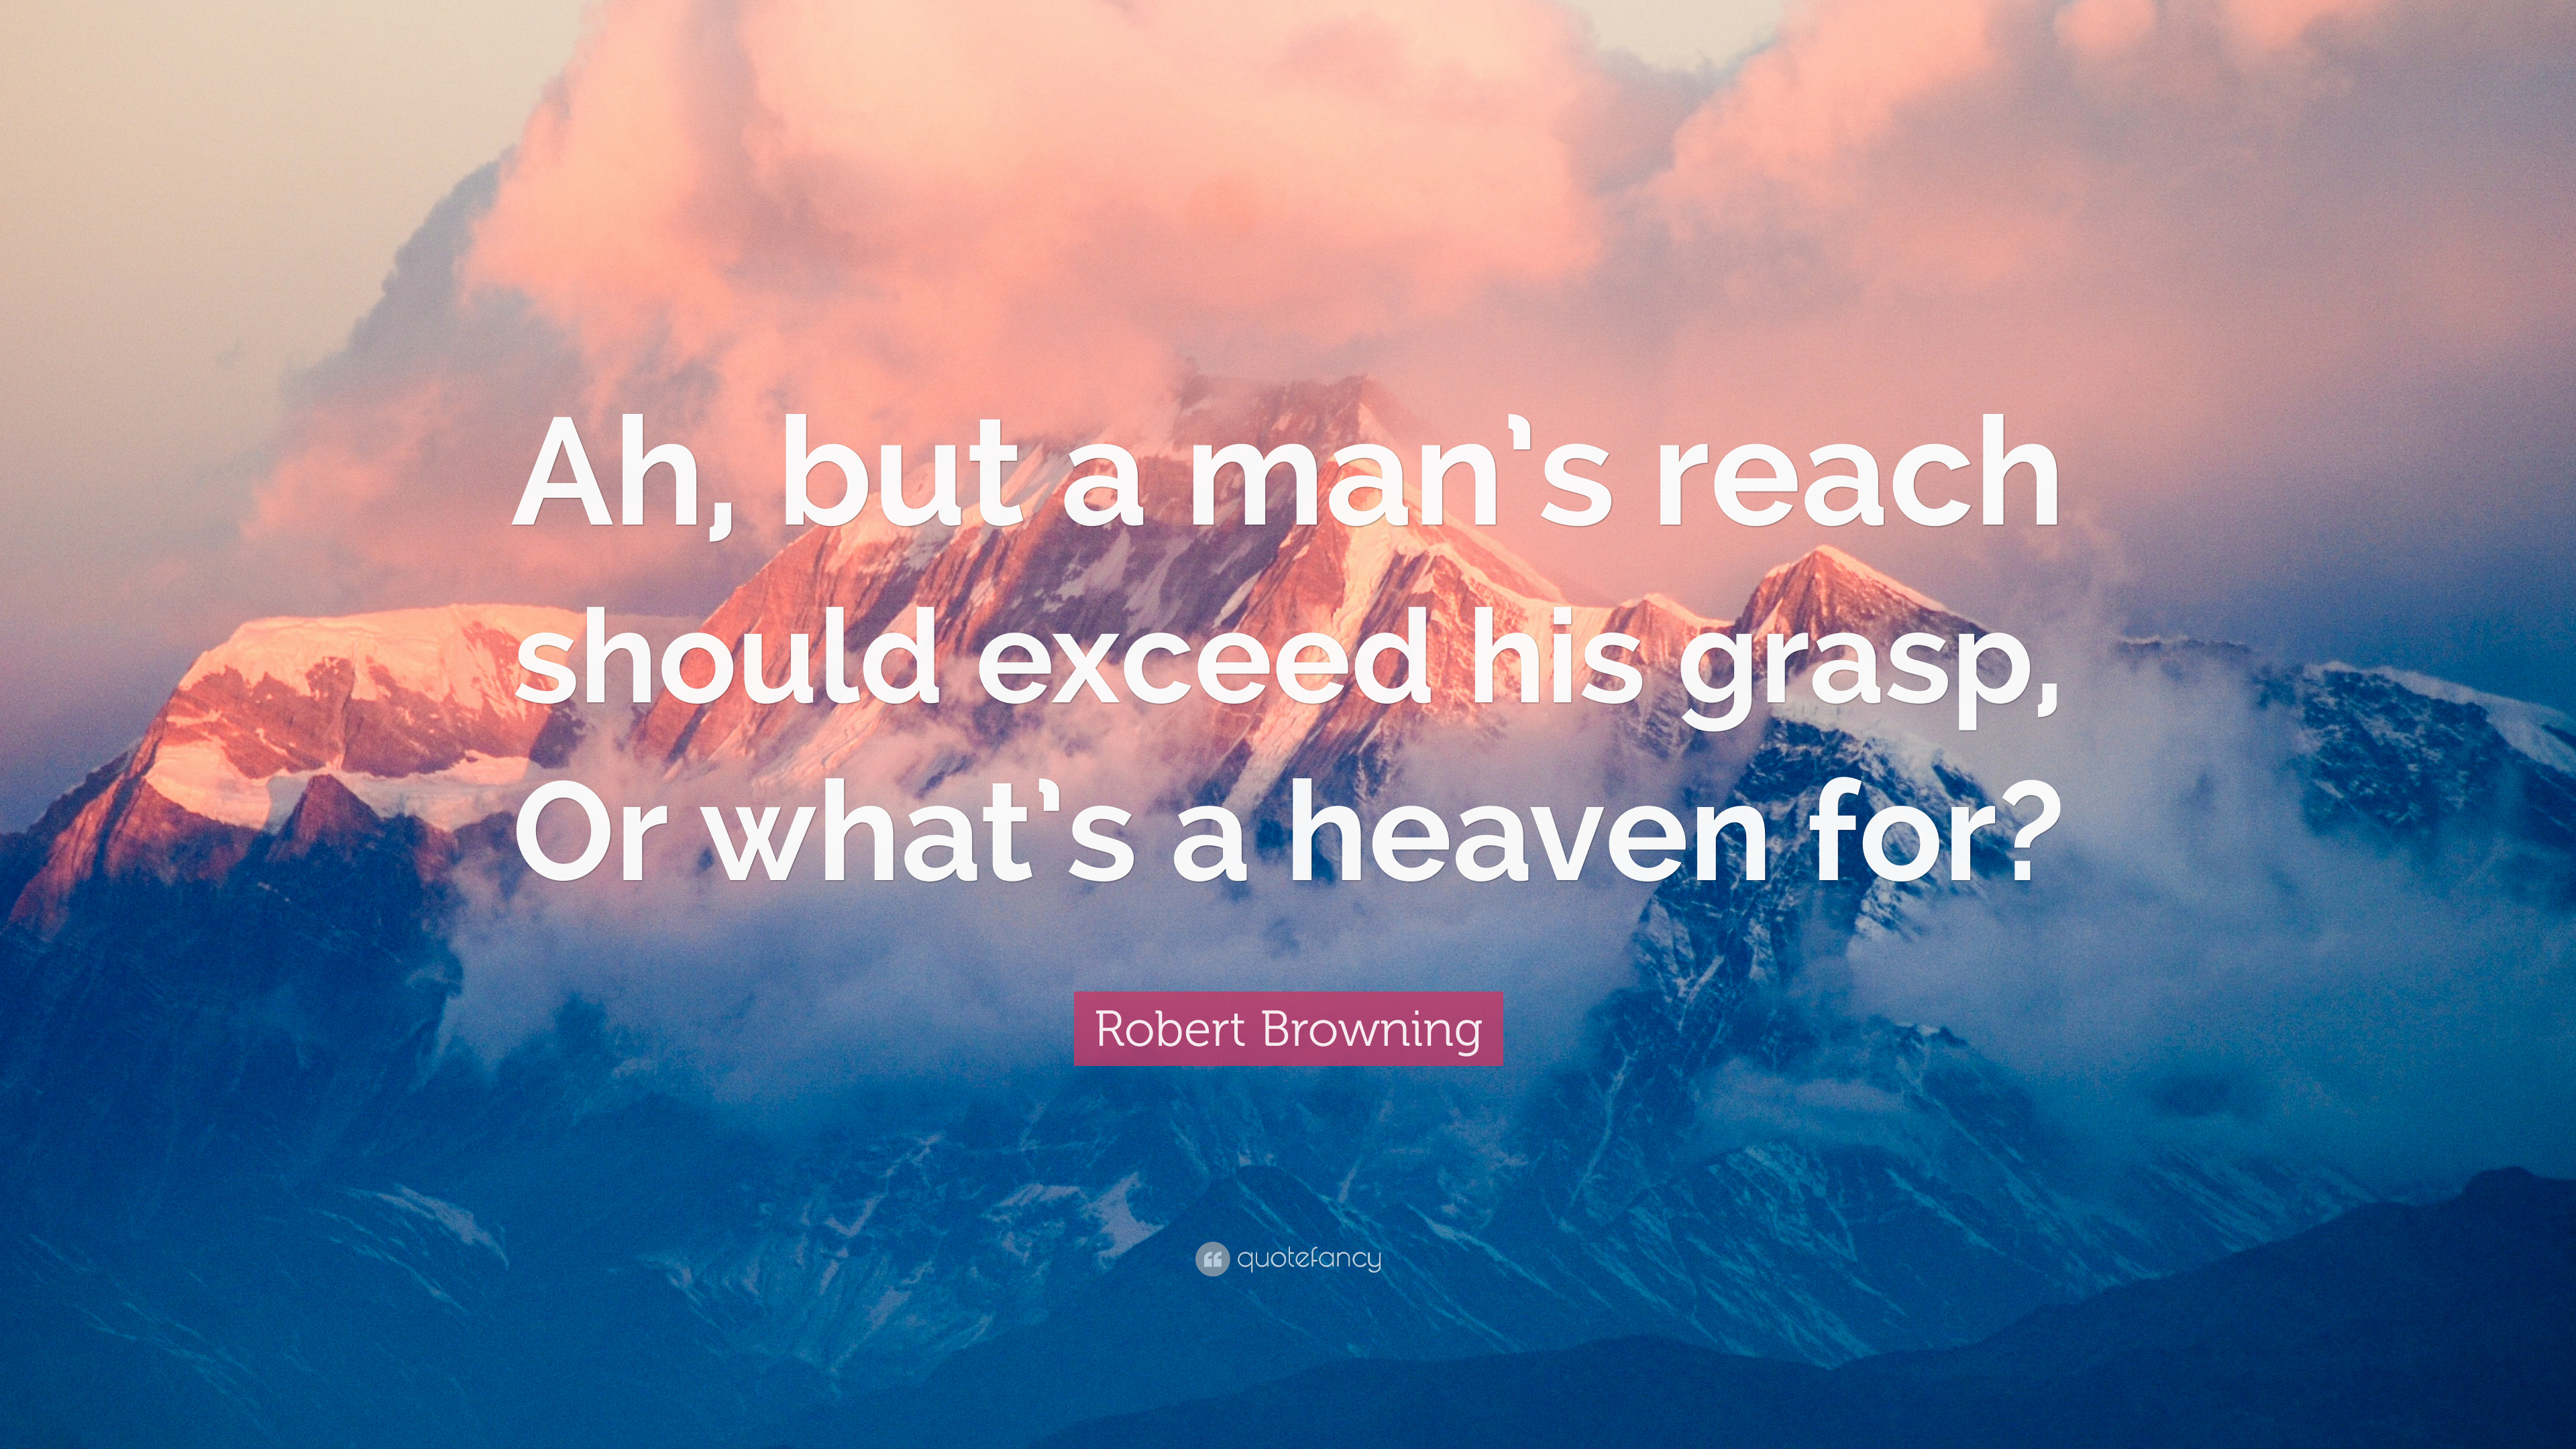 Robert Browning Quote: “Ah, but a man's reach should exceed his ...